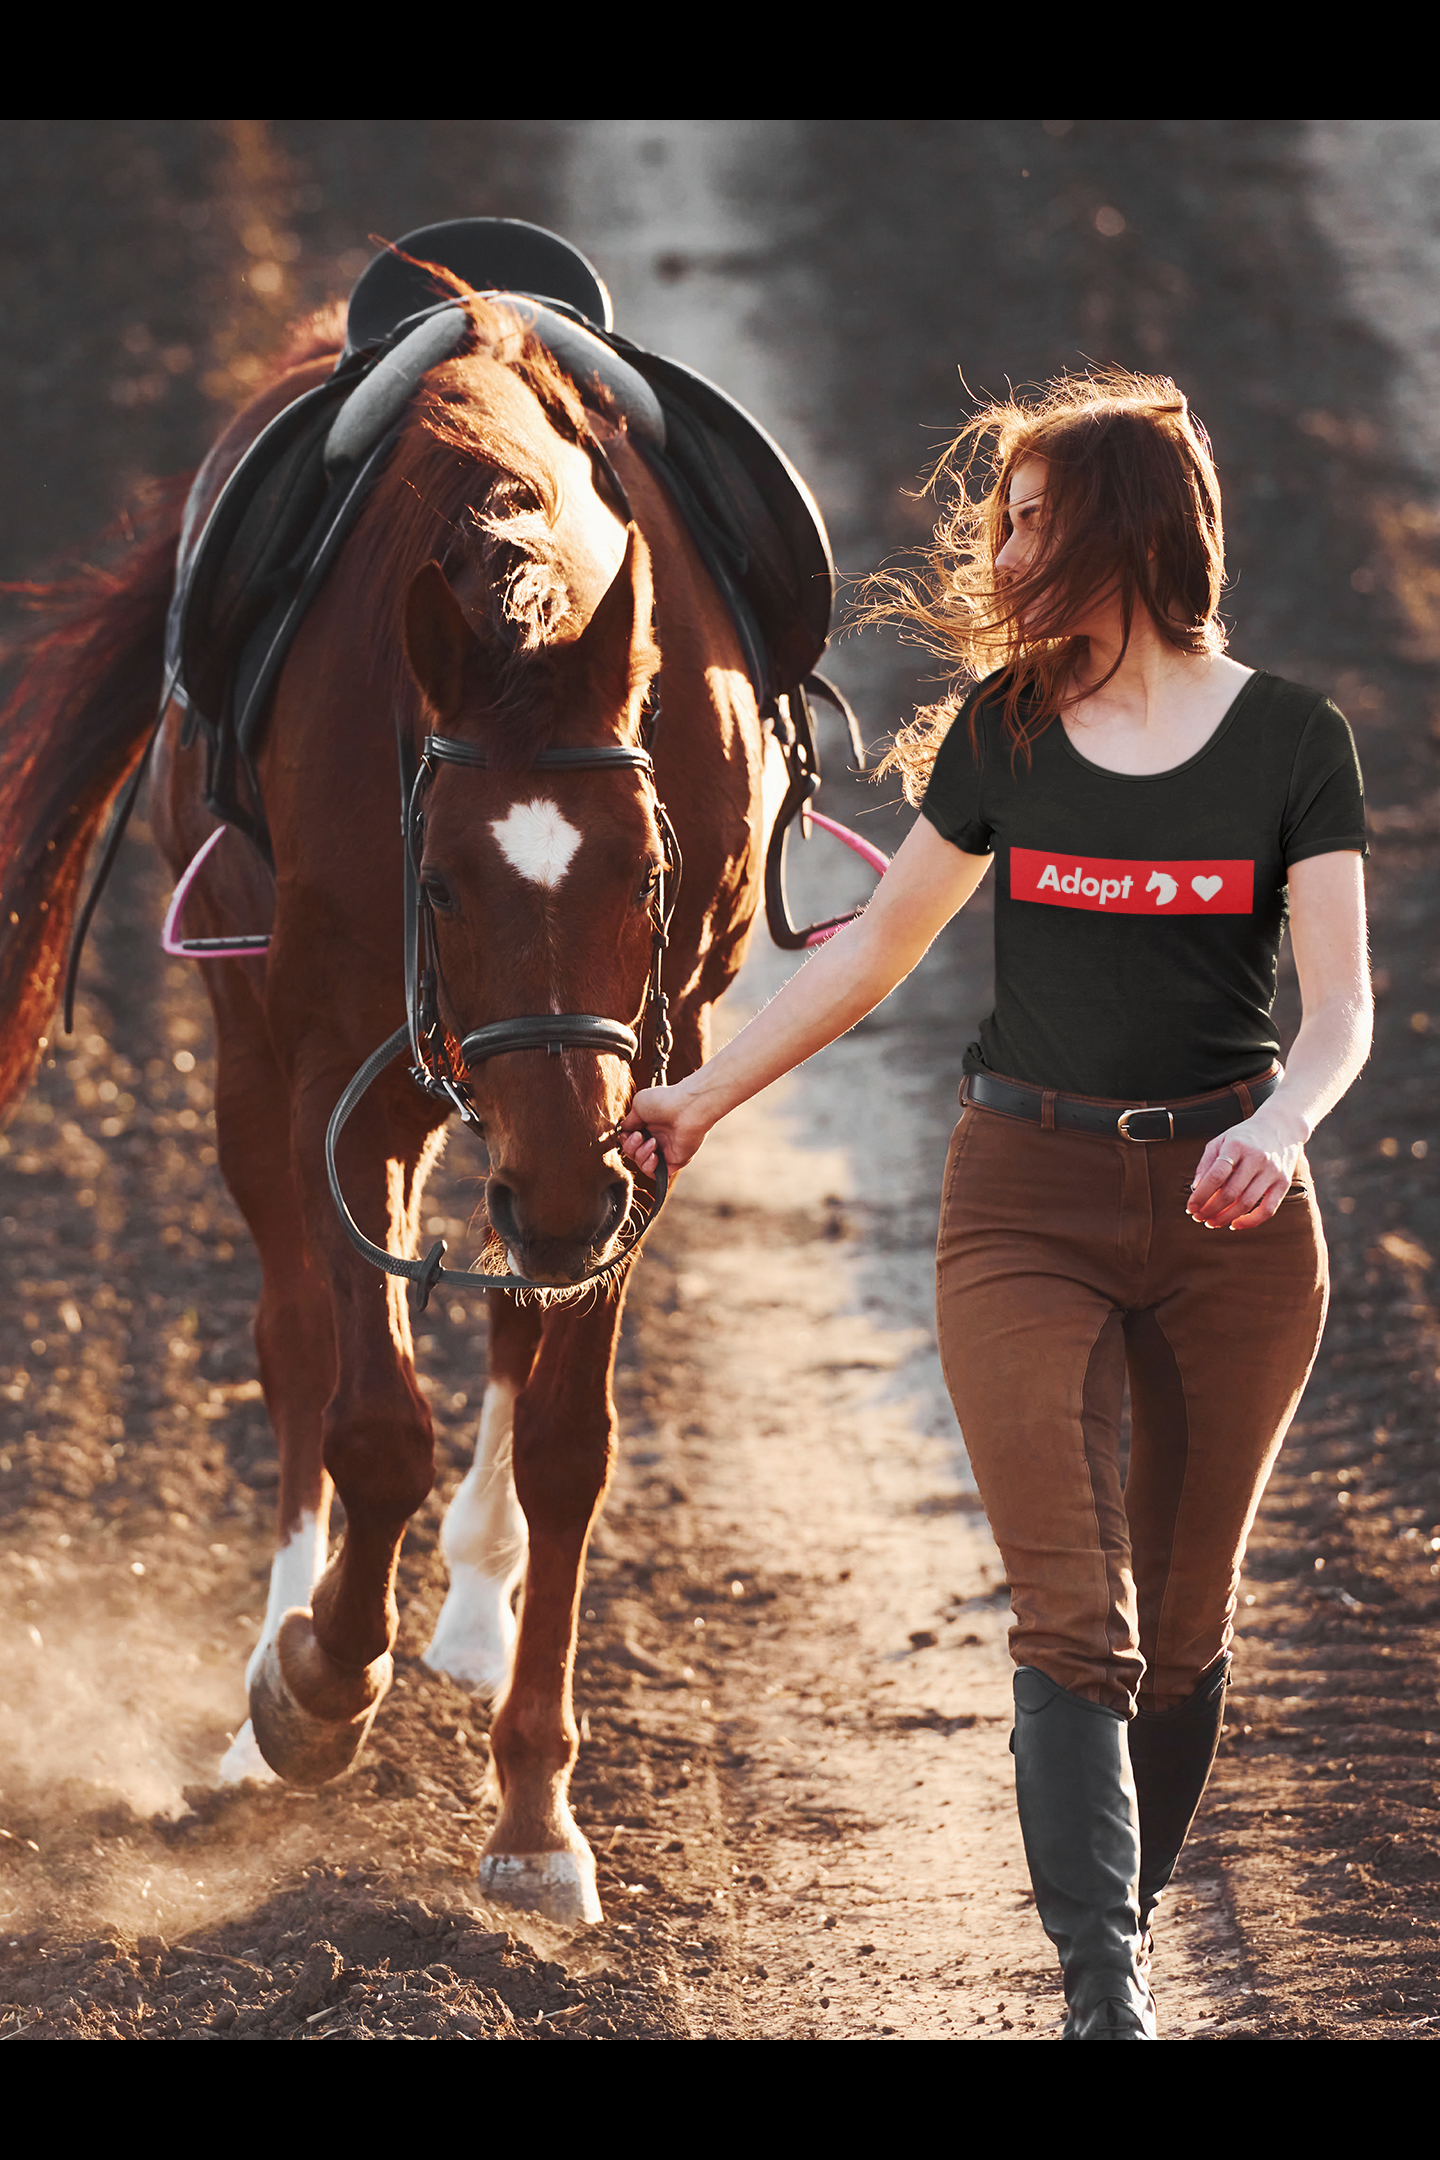 Adopt Love Rescue Horse - RED BANNER : Unisex 100% Comfy Cotton T-Shirt, Supporting Humane Animal Shelters